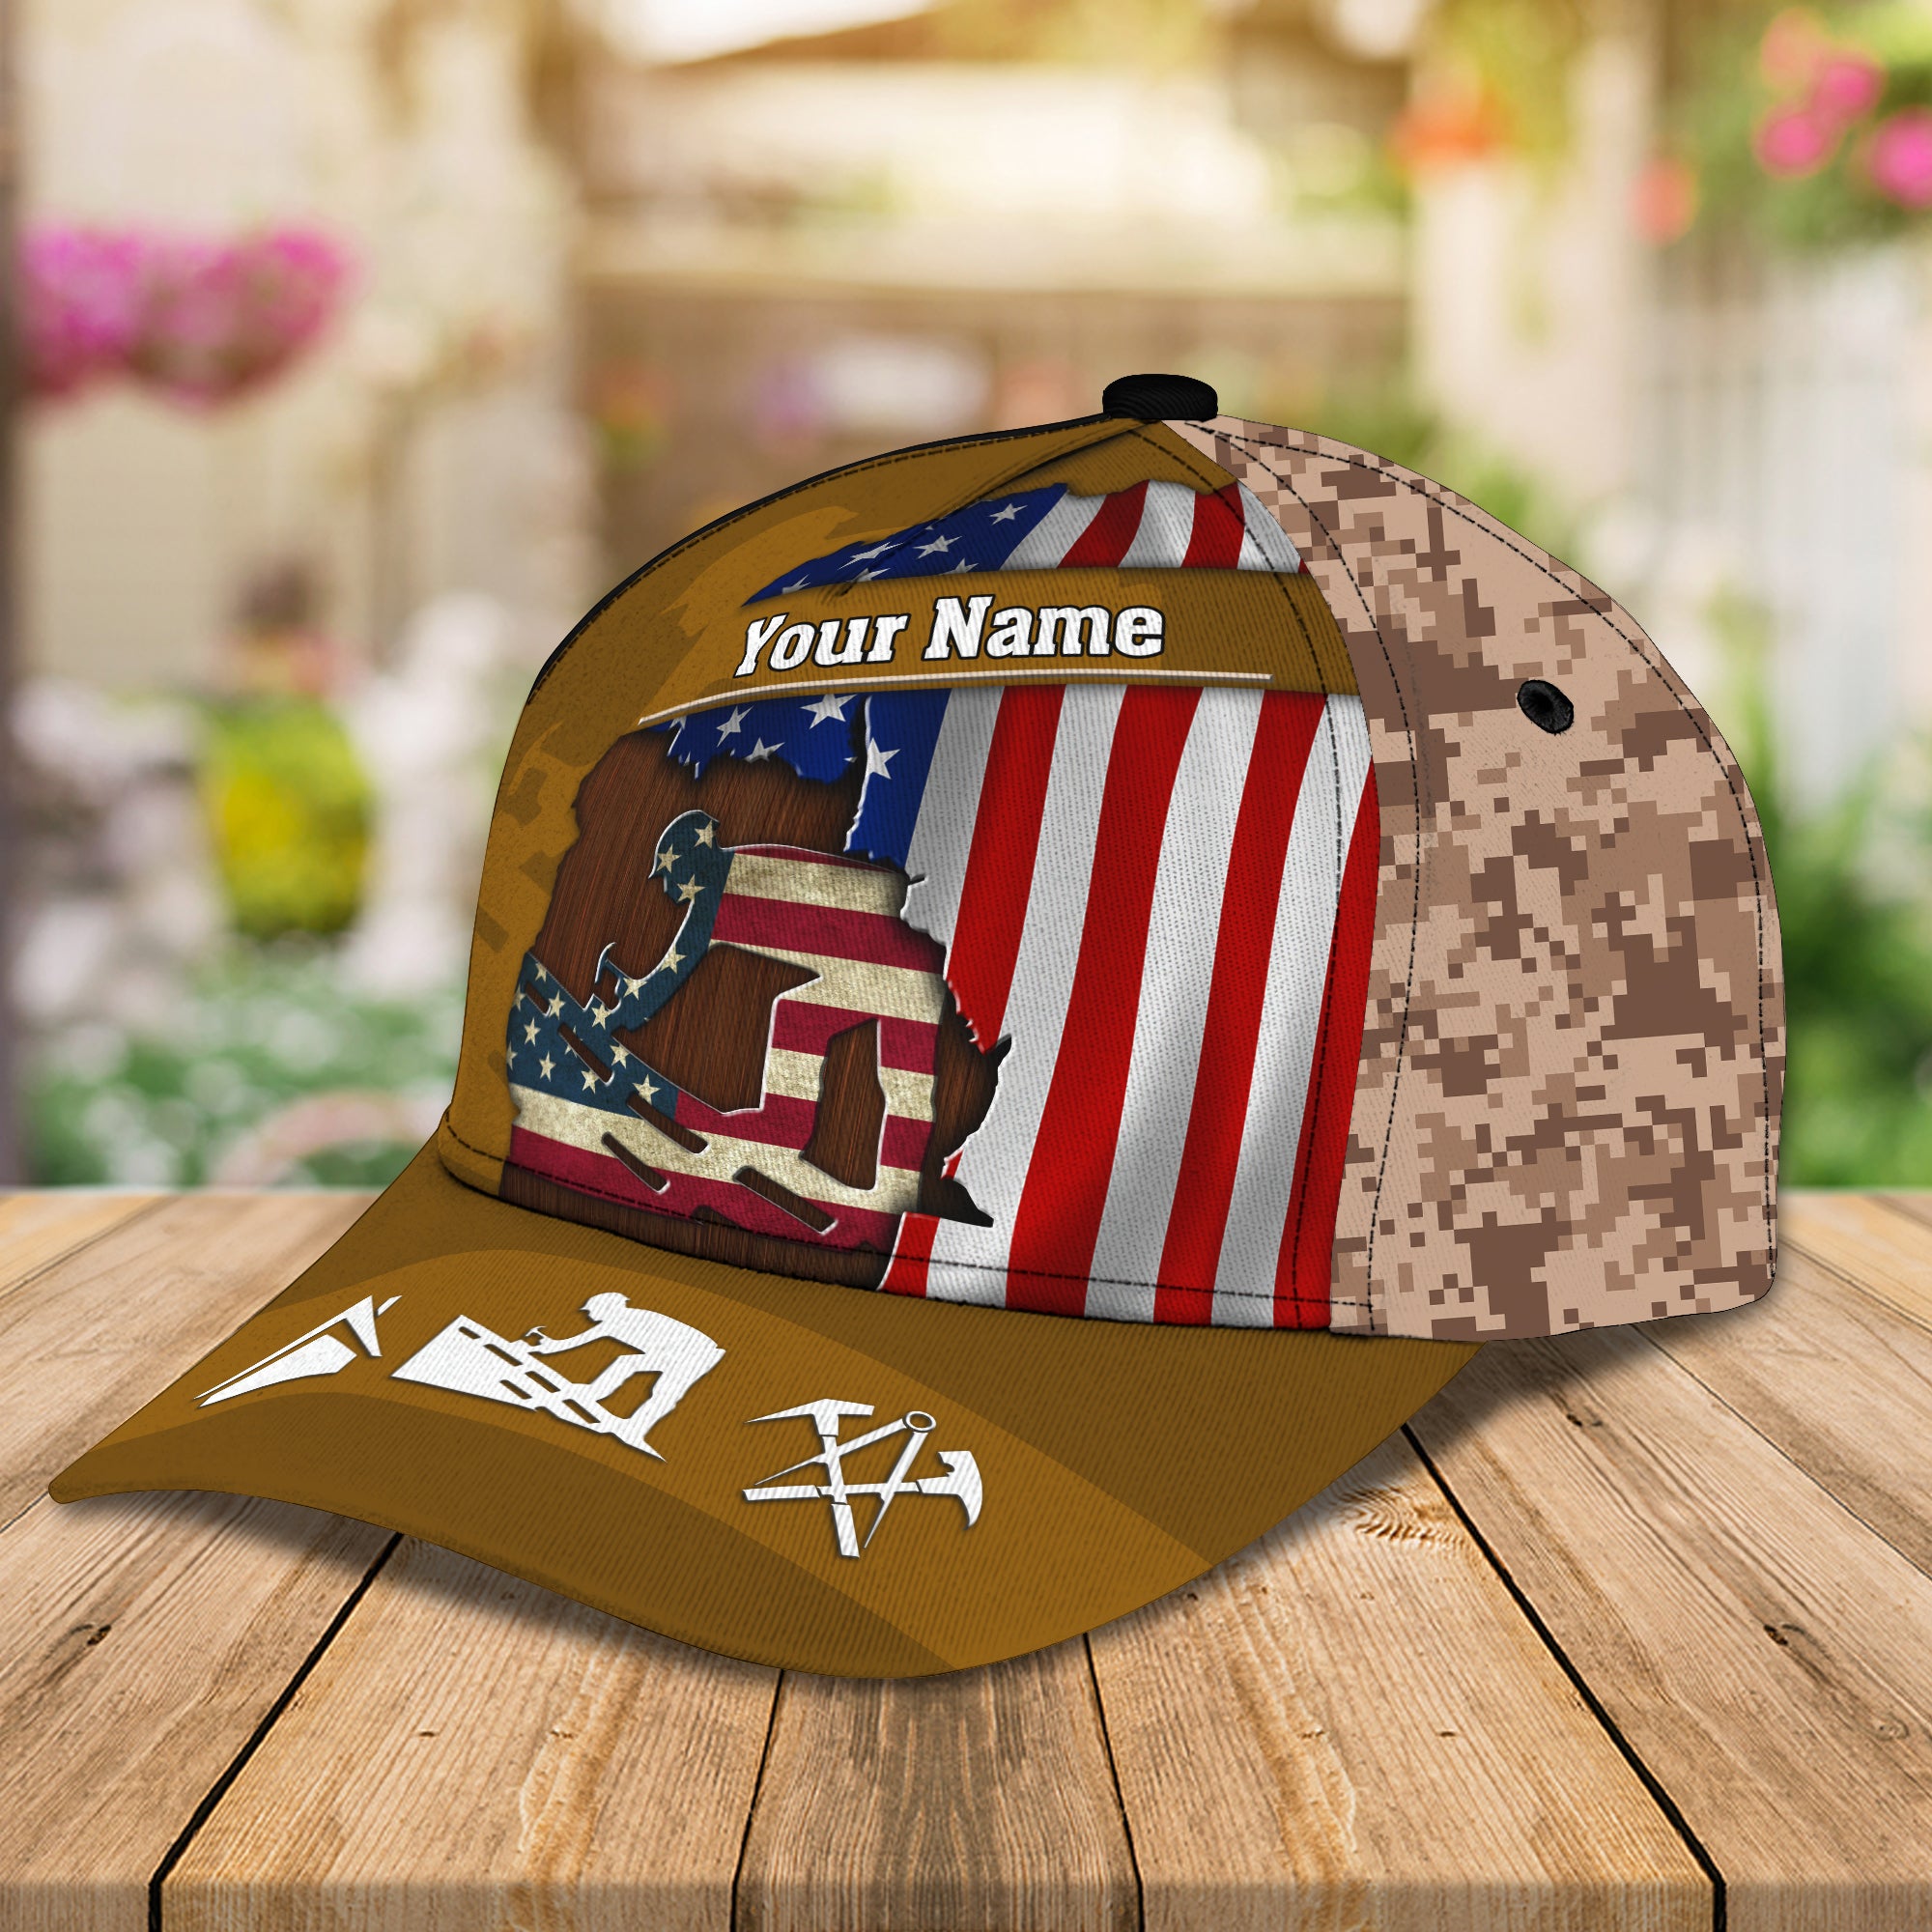 Roofer Hd98- Personalized Name Cap -Loop- Hd98 36